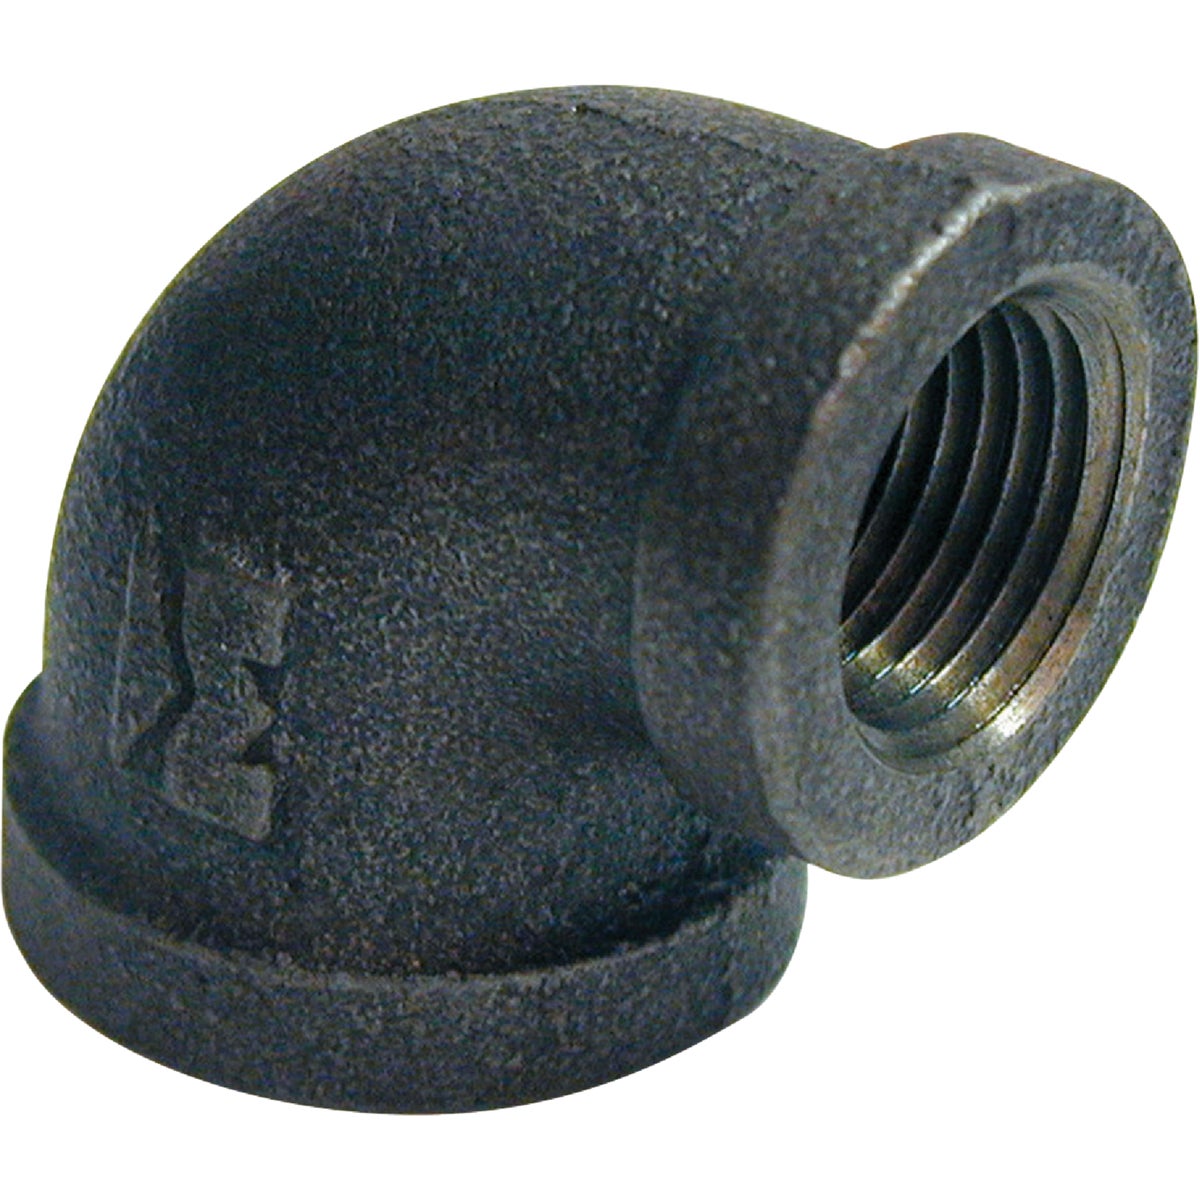 Southland 1 In. x 3/4 In. 90 Deg. Reducing Malleable Black Iron Elbow (1/4 Bend)